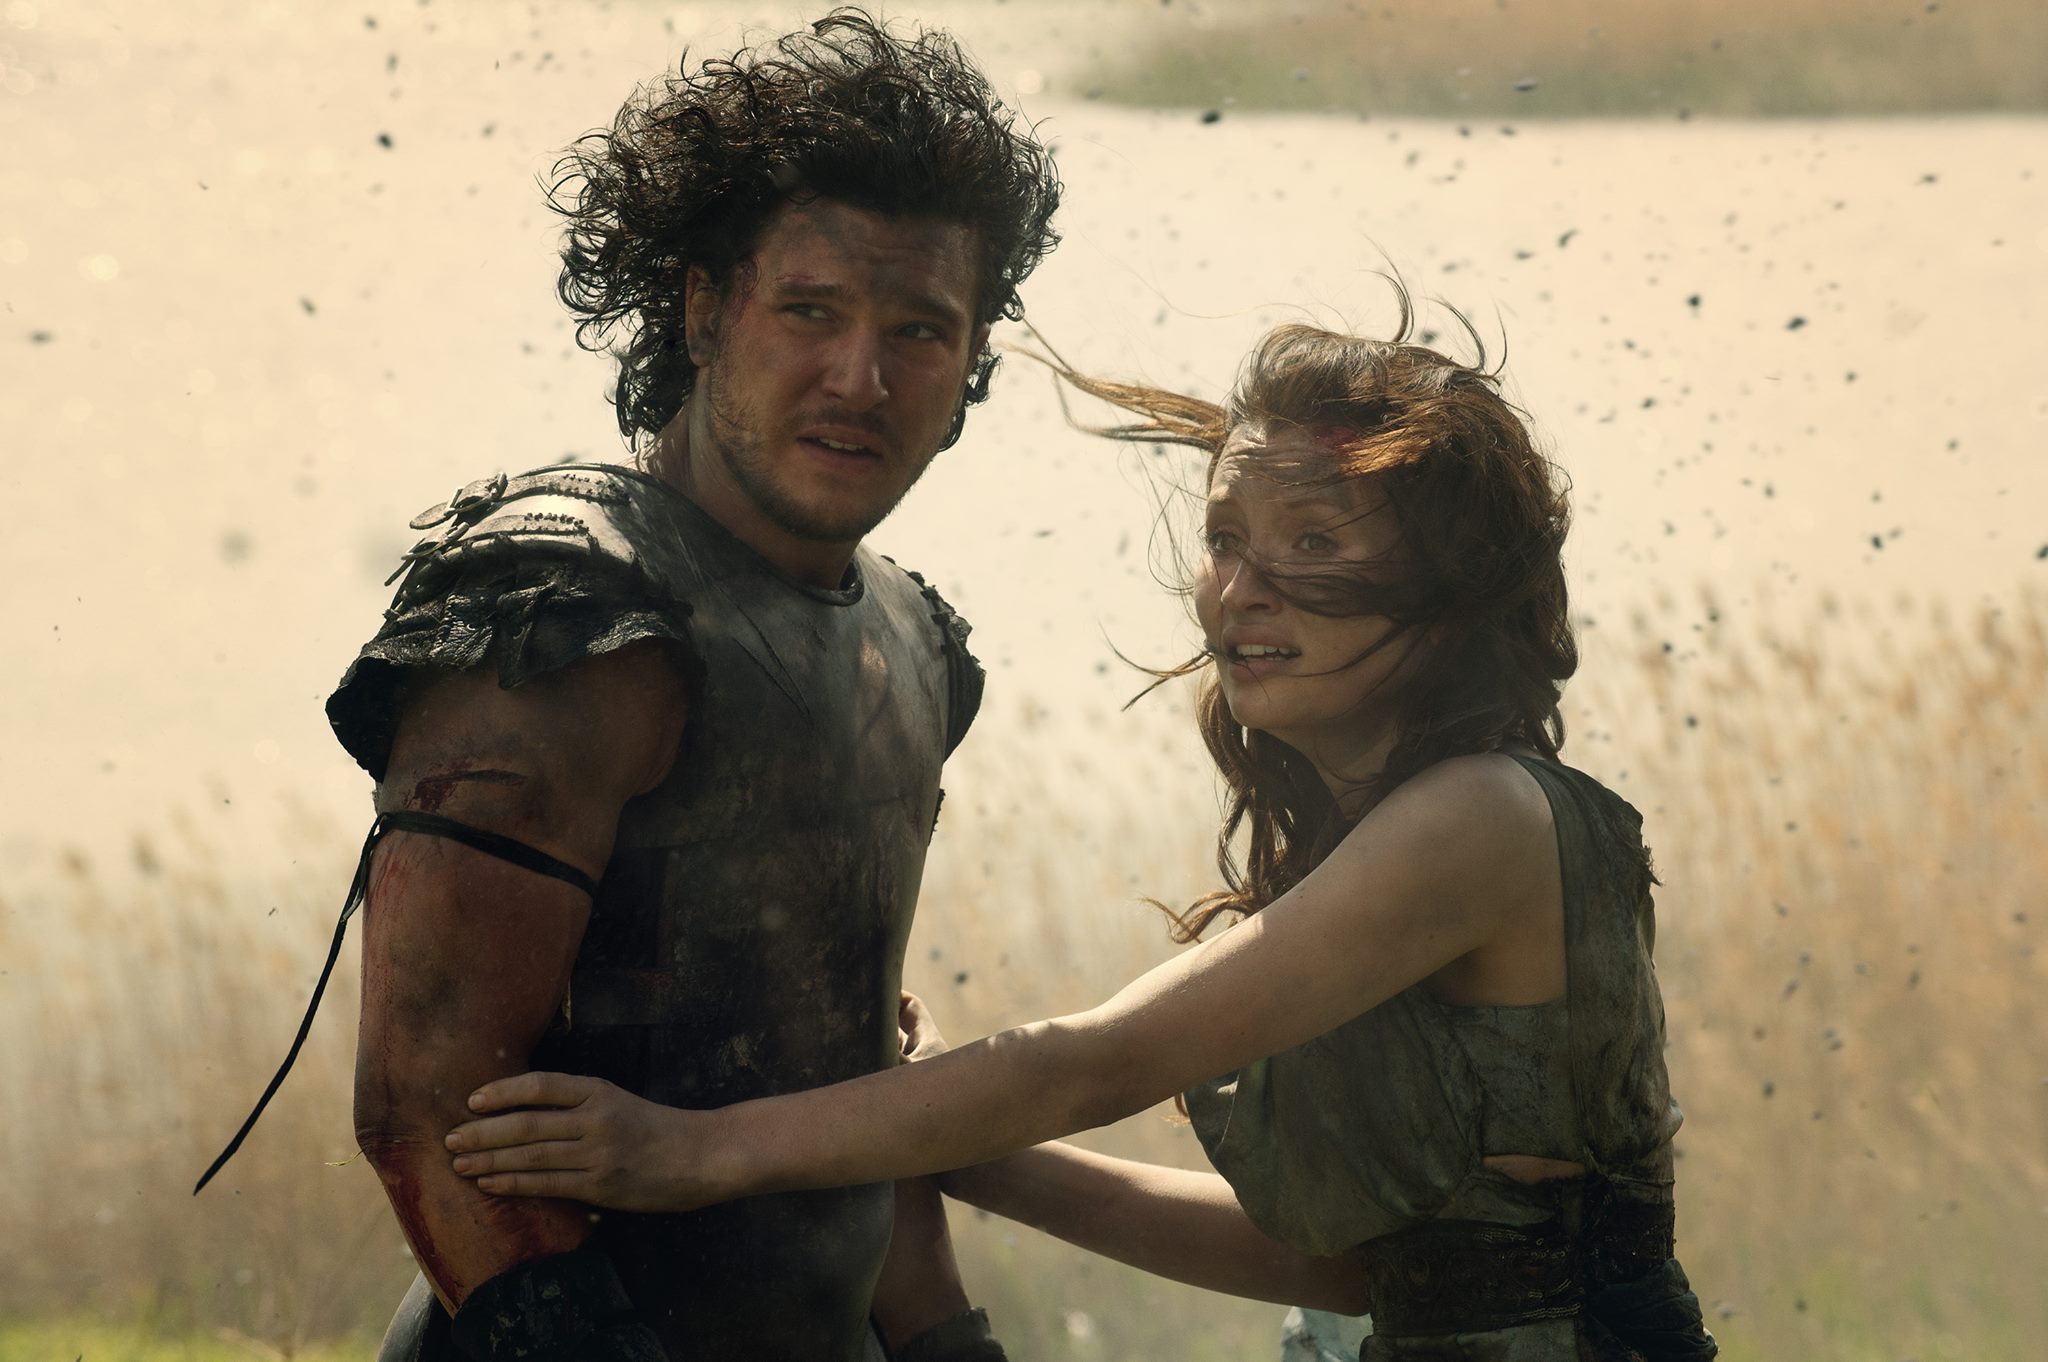 Kit-Harington-and-Emily-Browning-in-Pompeii